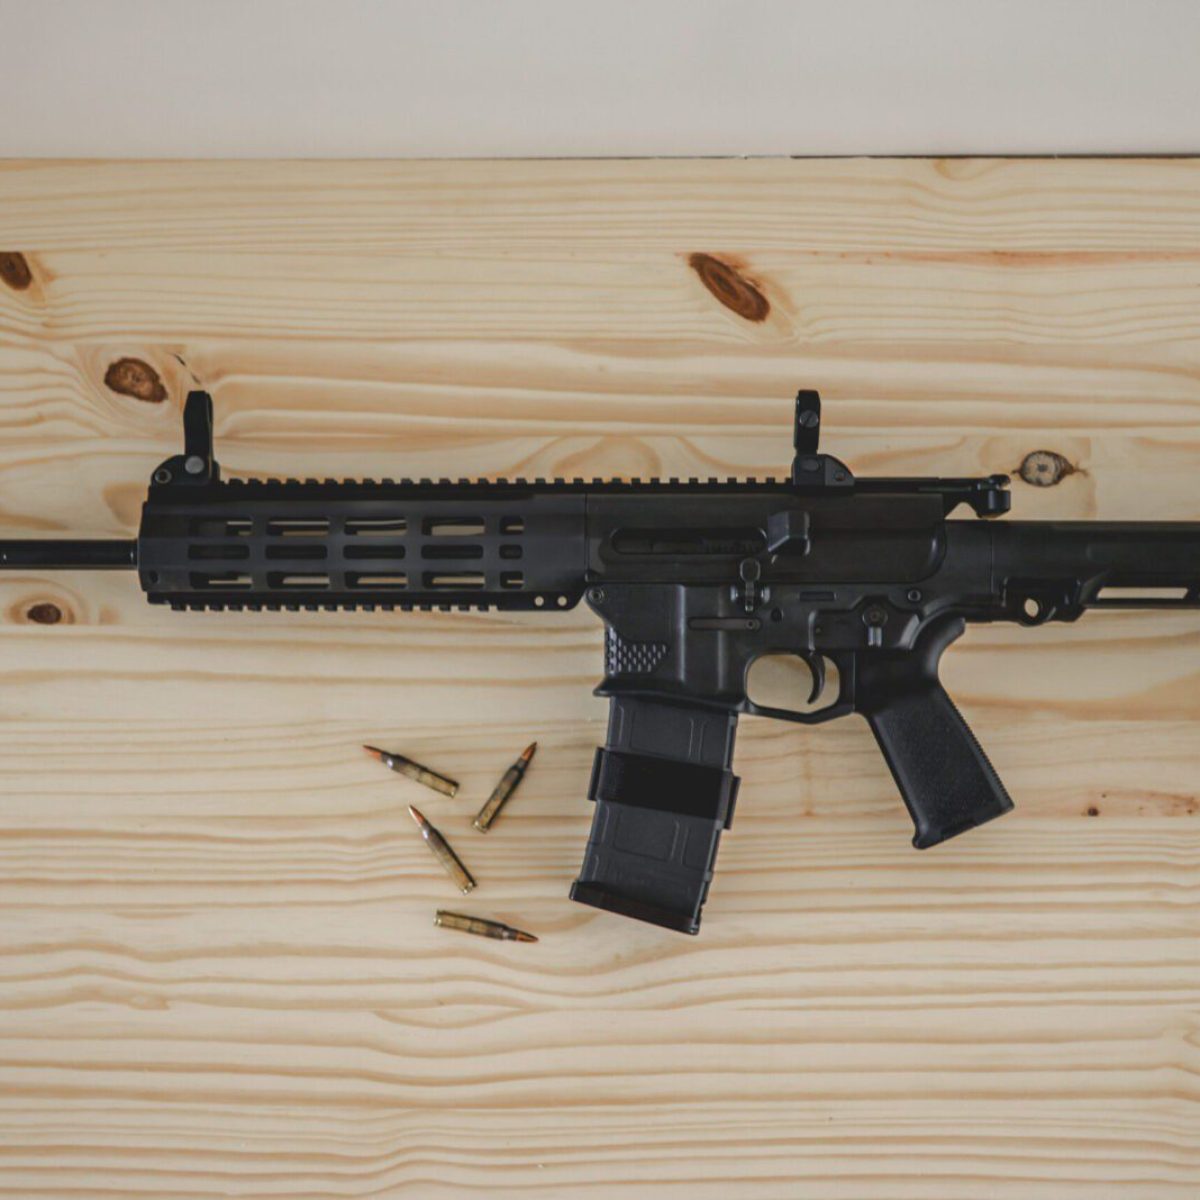 DBR Snake - double barrel AR15 rifle on a white pine board with 5.56 ammo